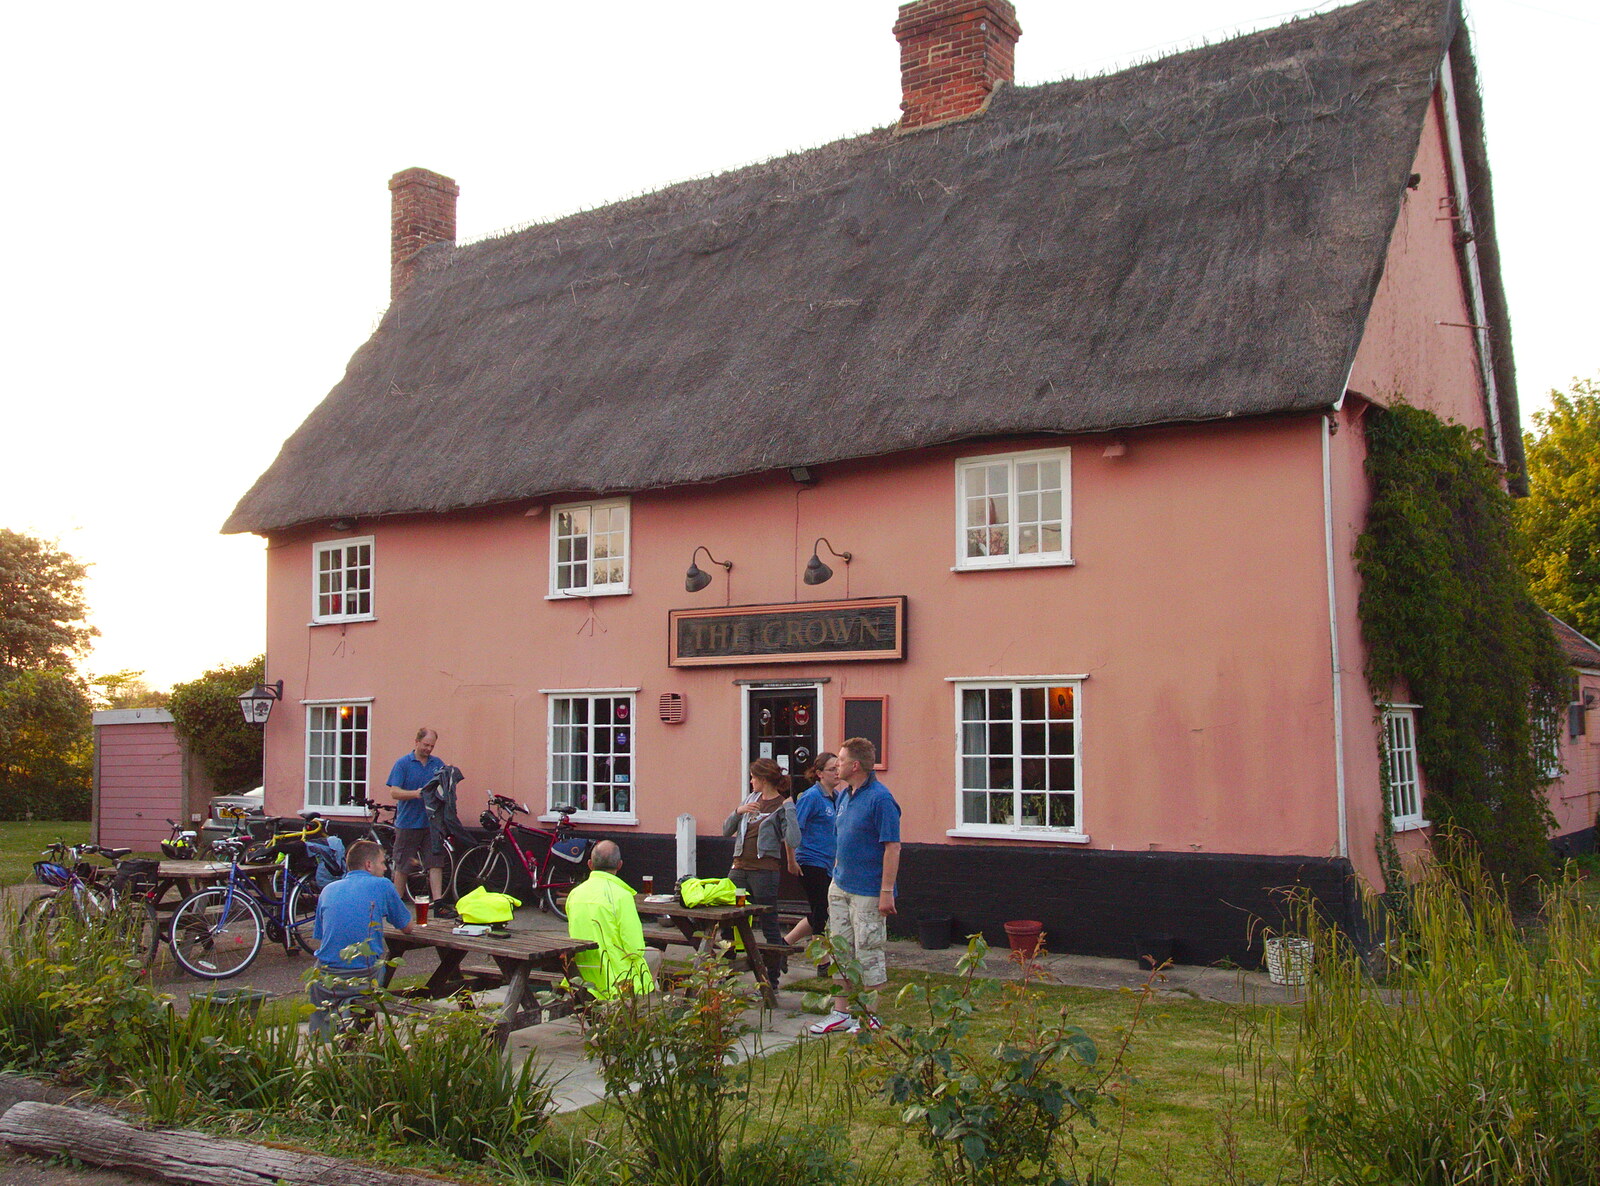 The BSCC outside the Bedfield Crown from The BSCC at The Crown, Bedfield, Suffolk - 15th May 2014